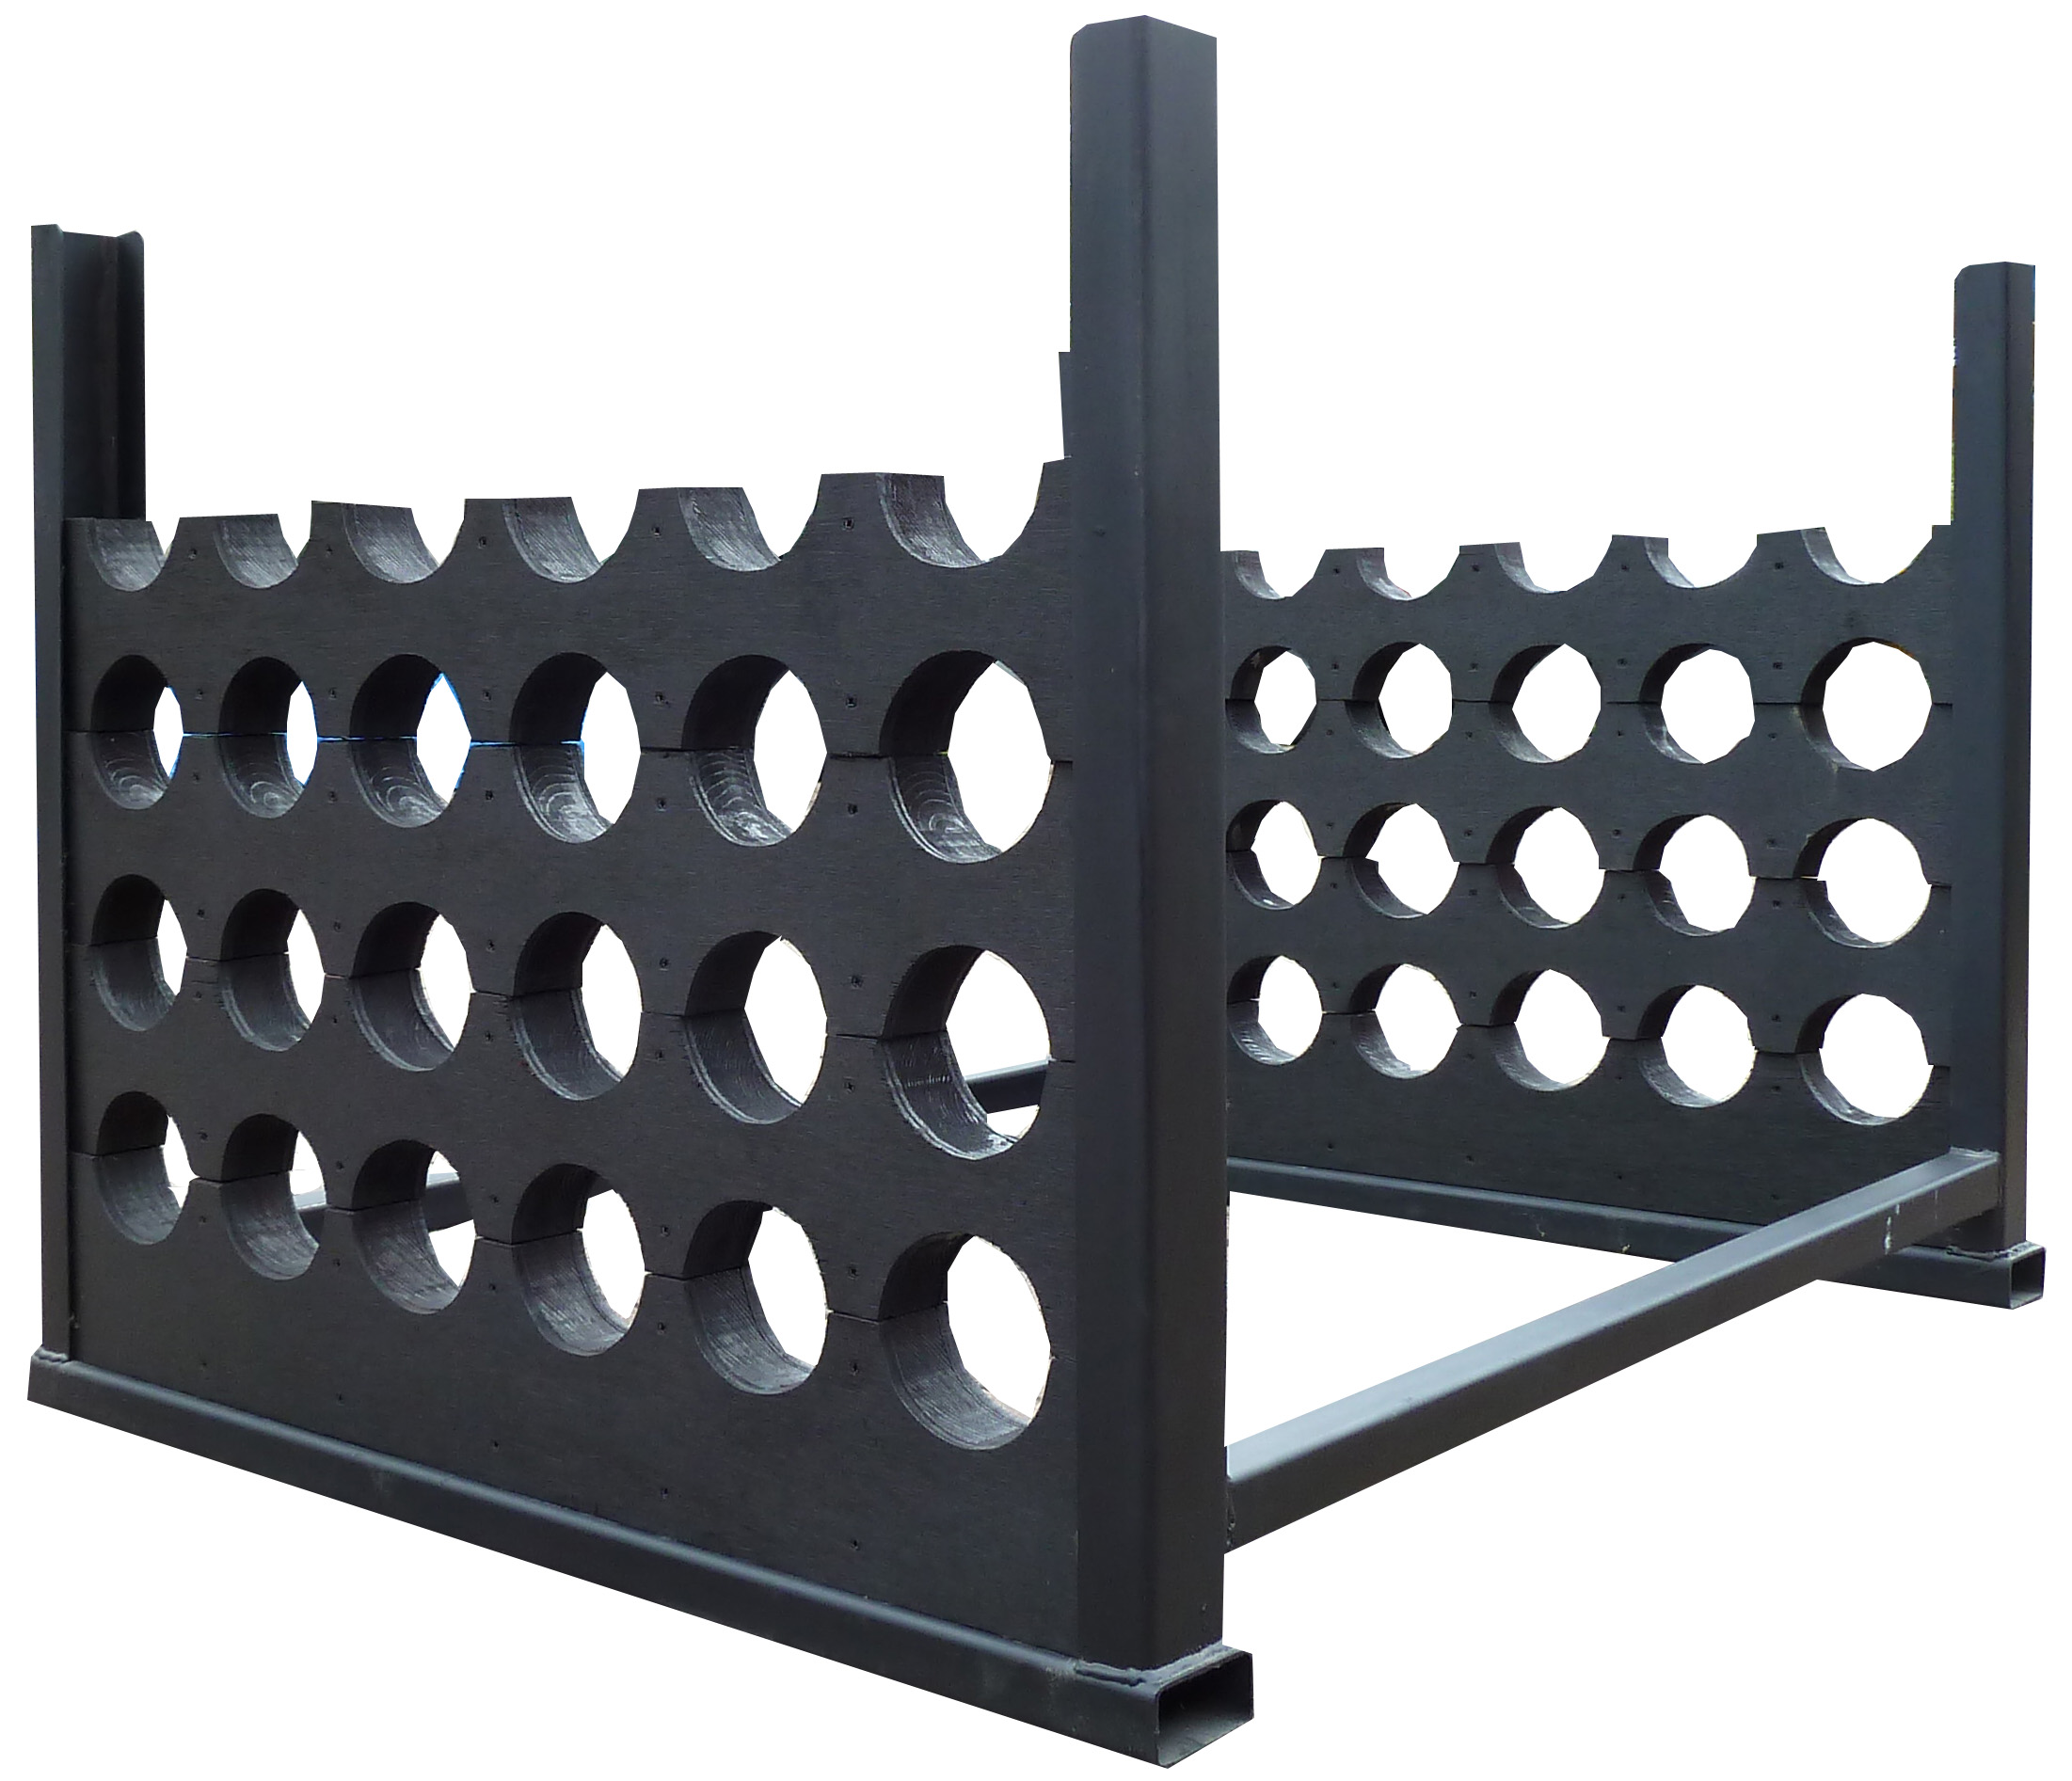 Equi rack with dividers for 24 poles in black